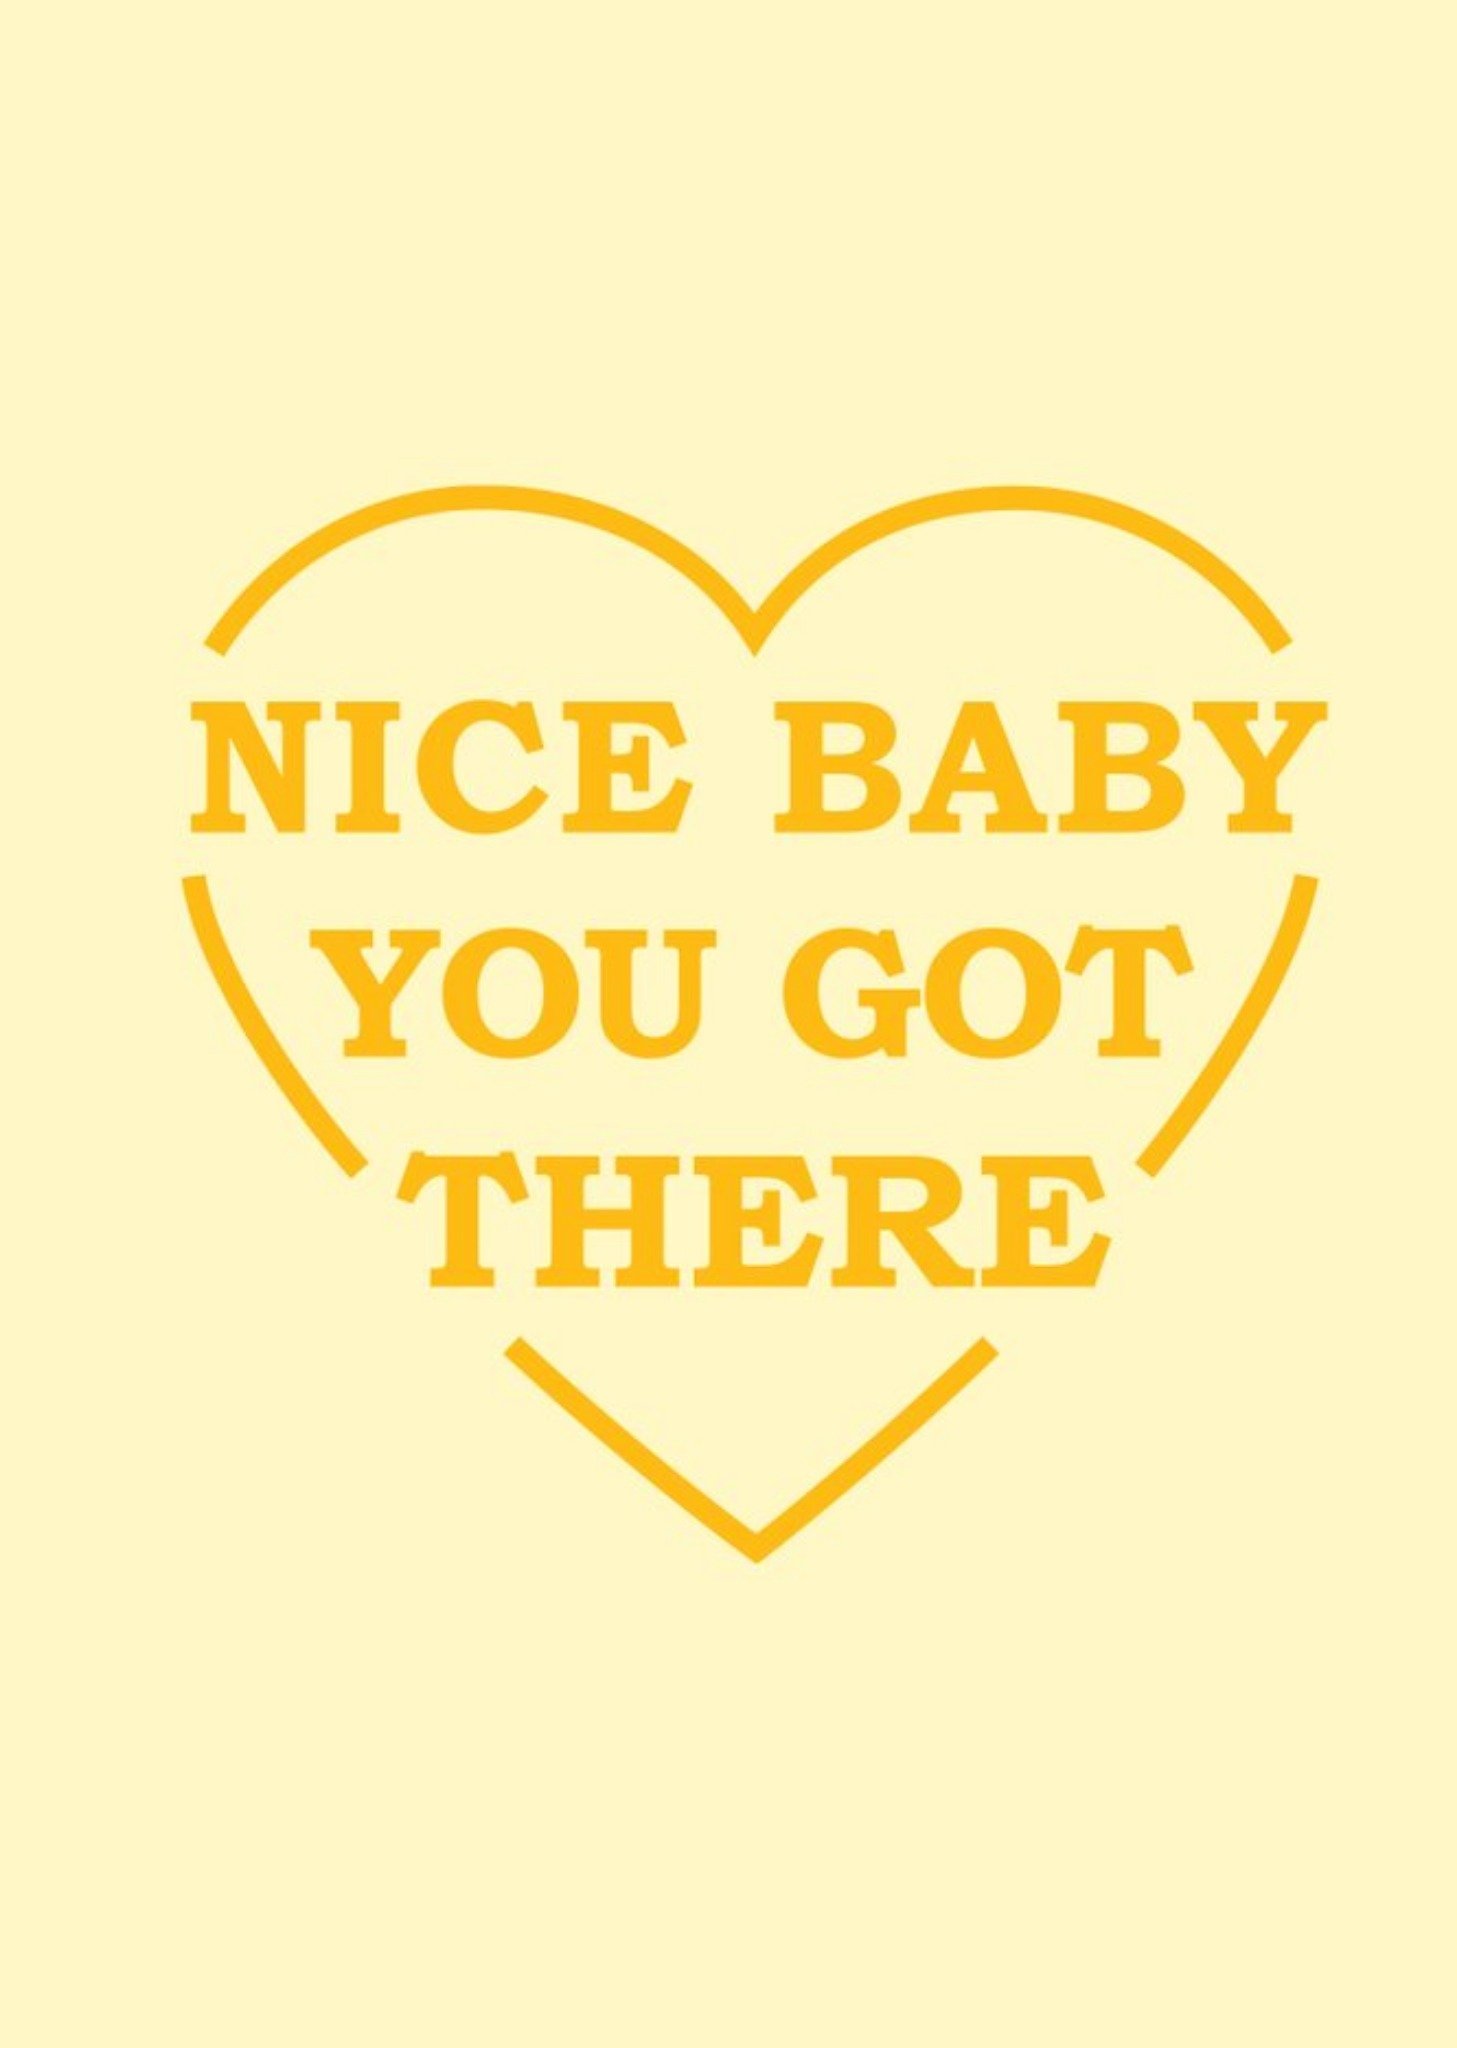 Moonpig Orange Typography Inside A Heart Shape On A Yellow Background New Baby Congratulations Card 